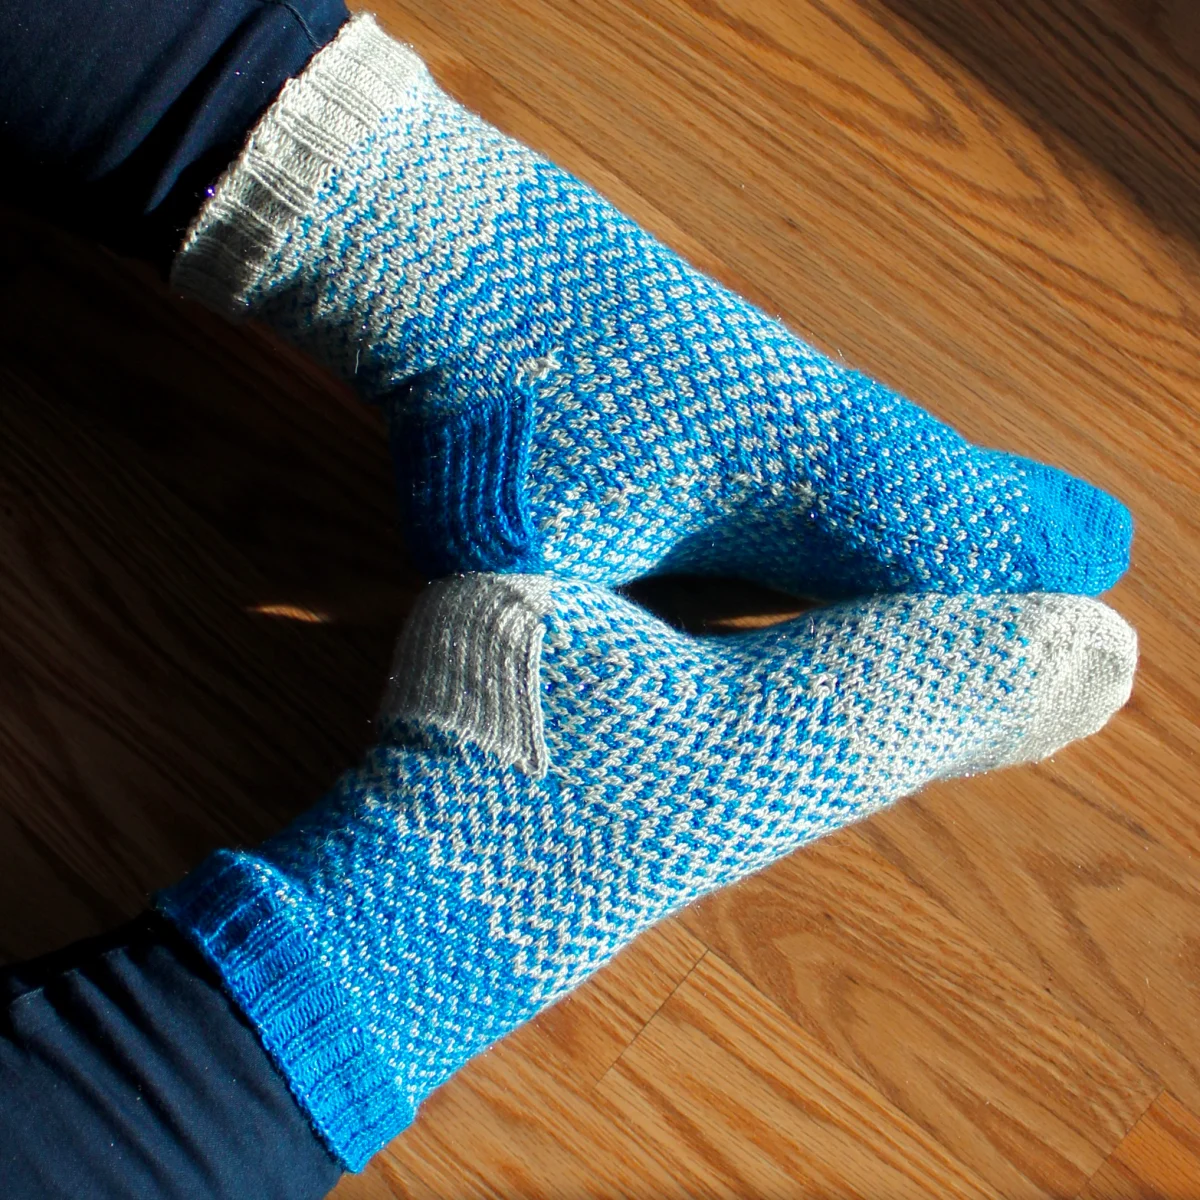 Feet heel-to-heel wearing fraternal blue and white sparkly colourwork socks.